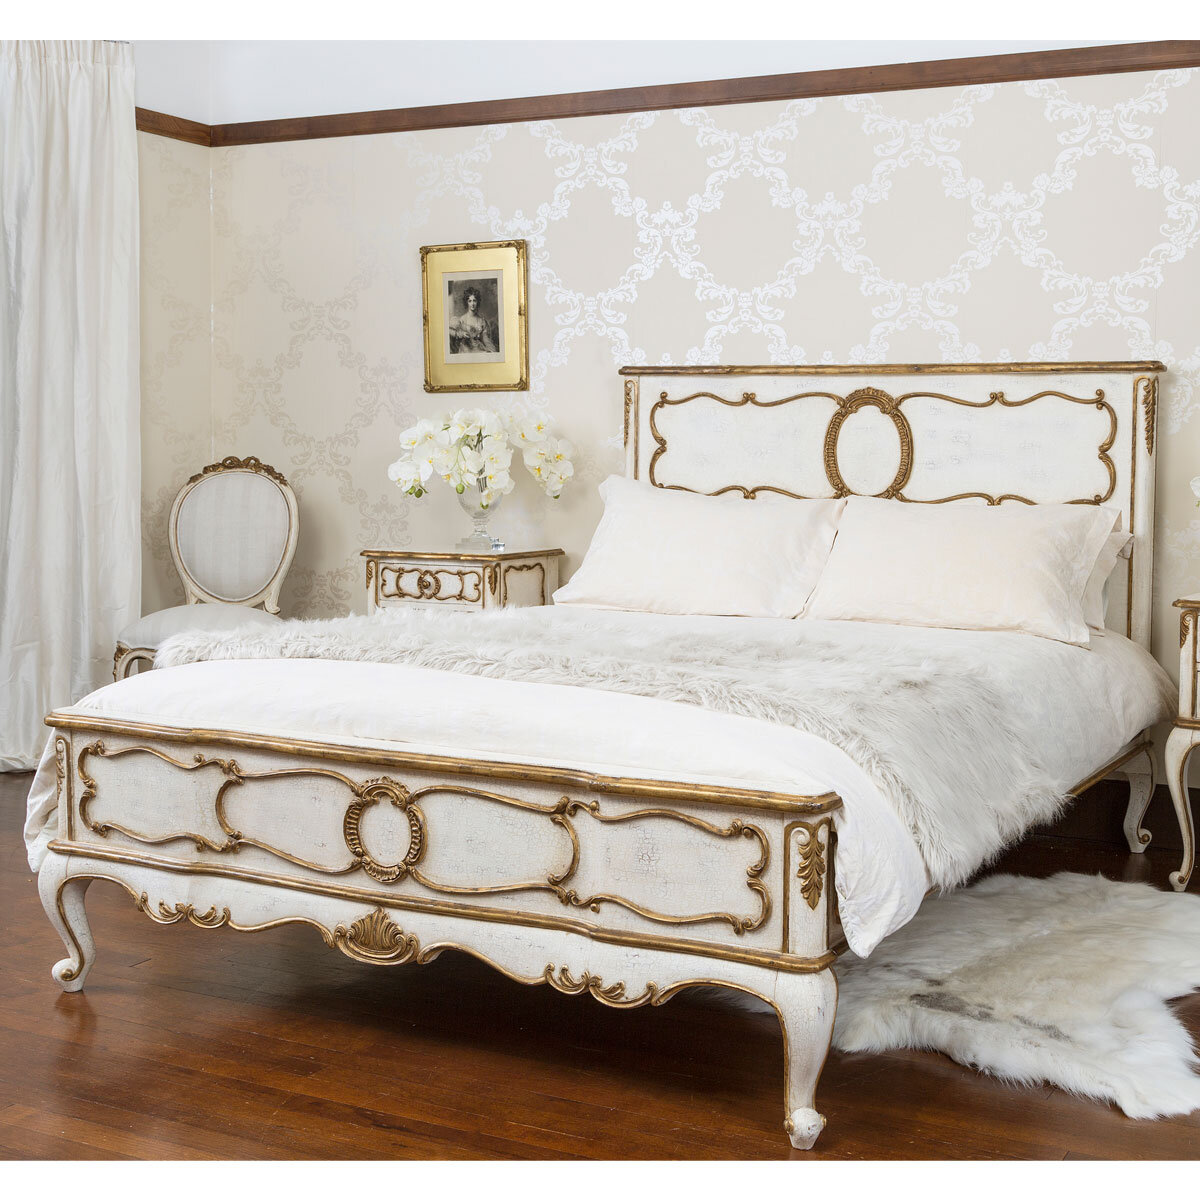 French bed - Palais -The French Bedroom Company - www.homeworlddesign.com